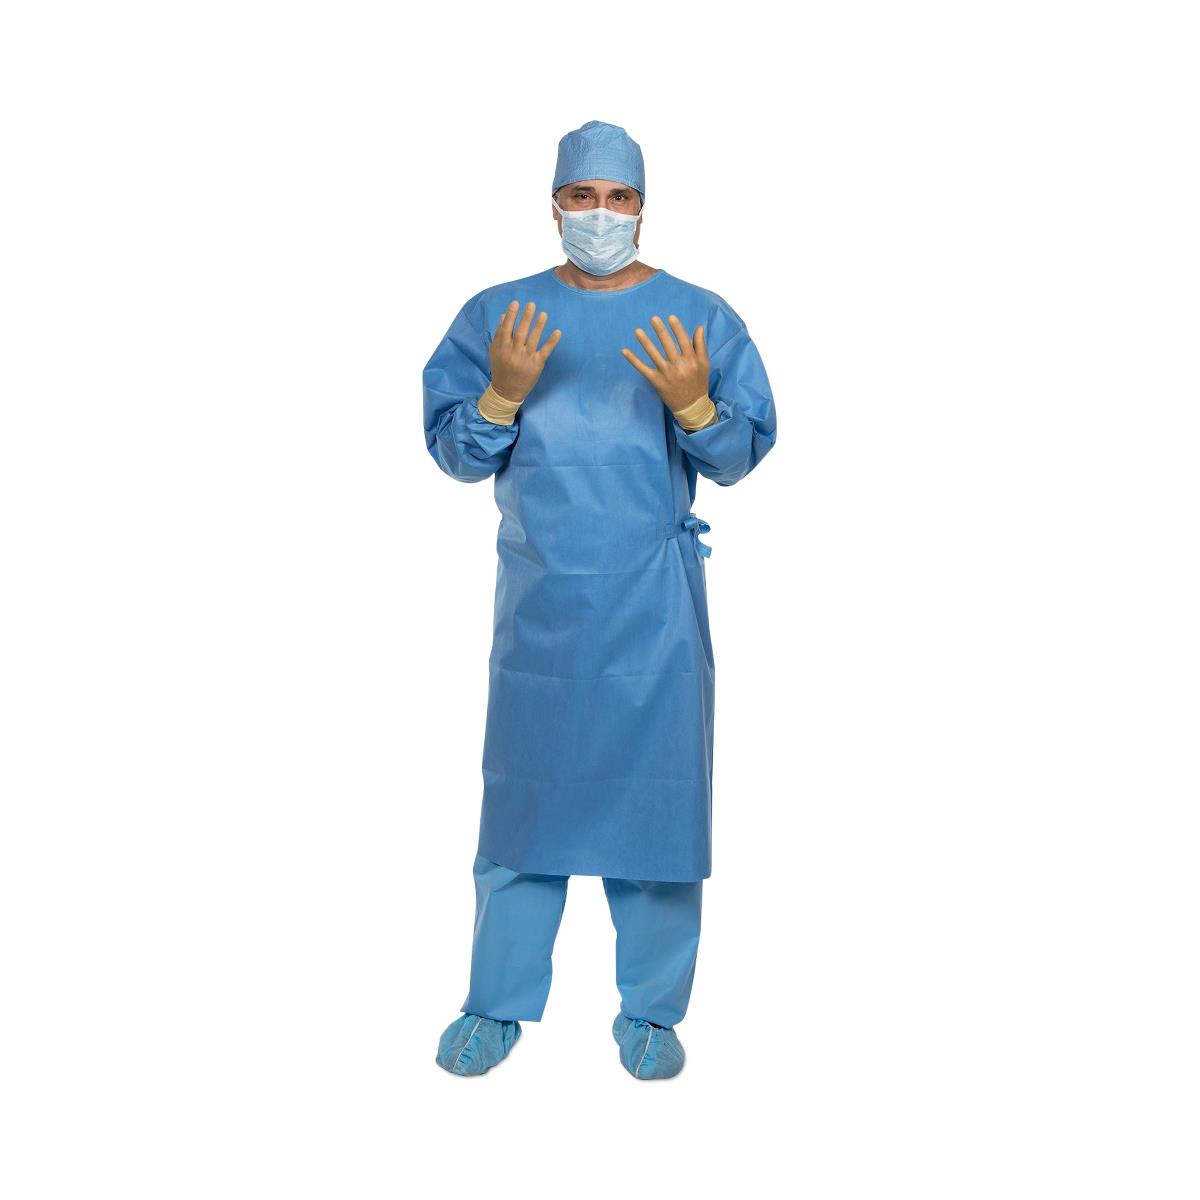 Halyard Nonreinforced Surgical Gowns | Medline Industries, Inc.